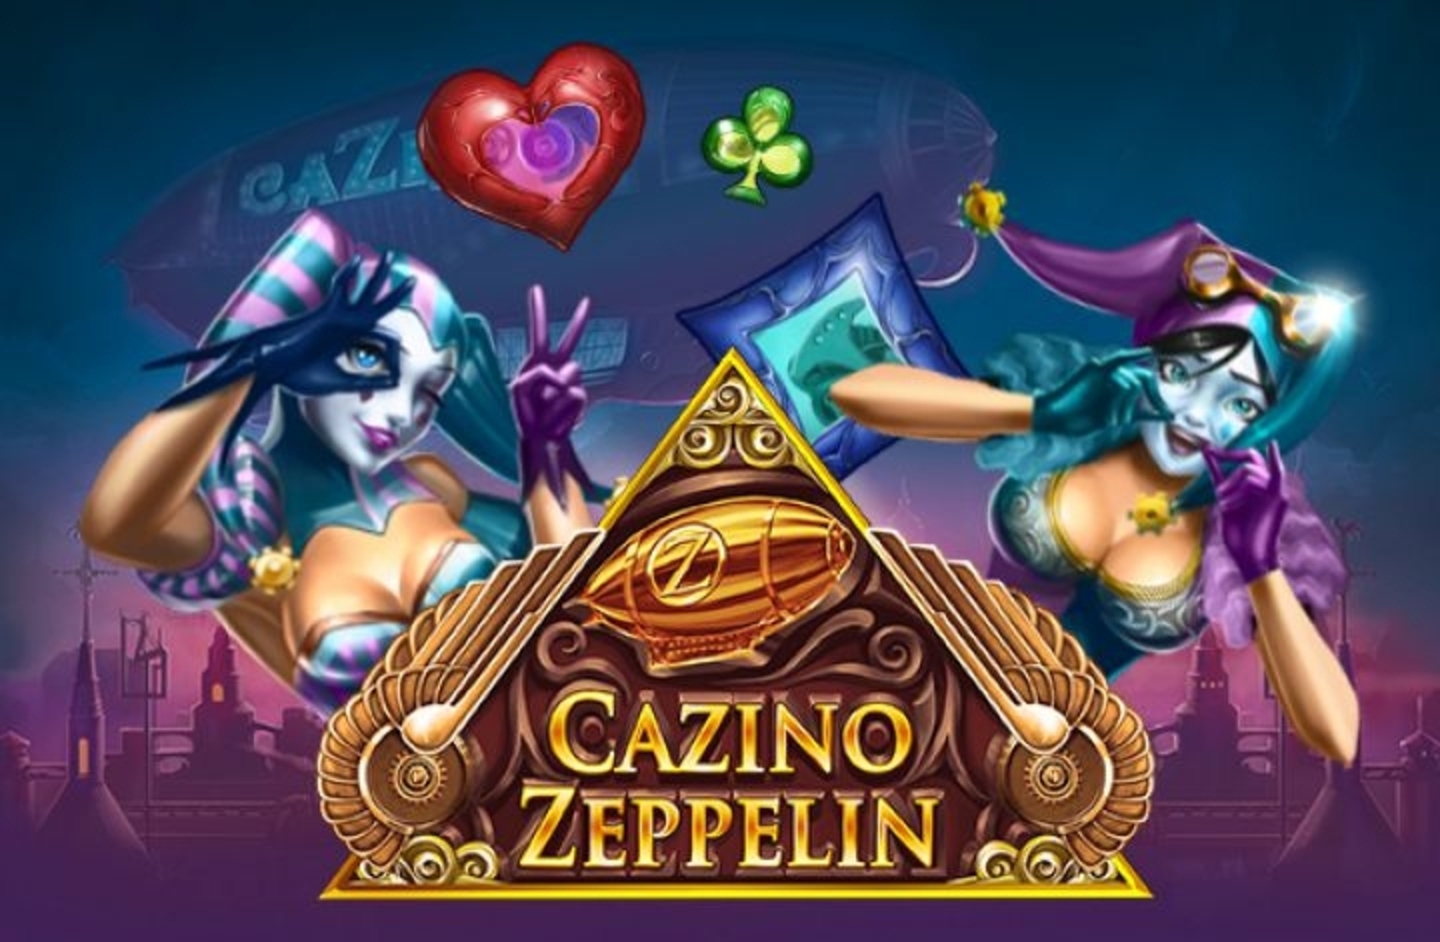 The Cazino Zeppelin Online Slot Demo Game by Yggdrasil Gaming